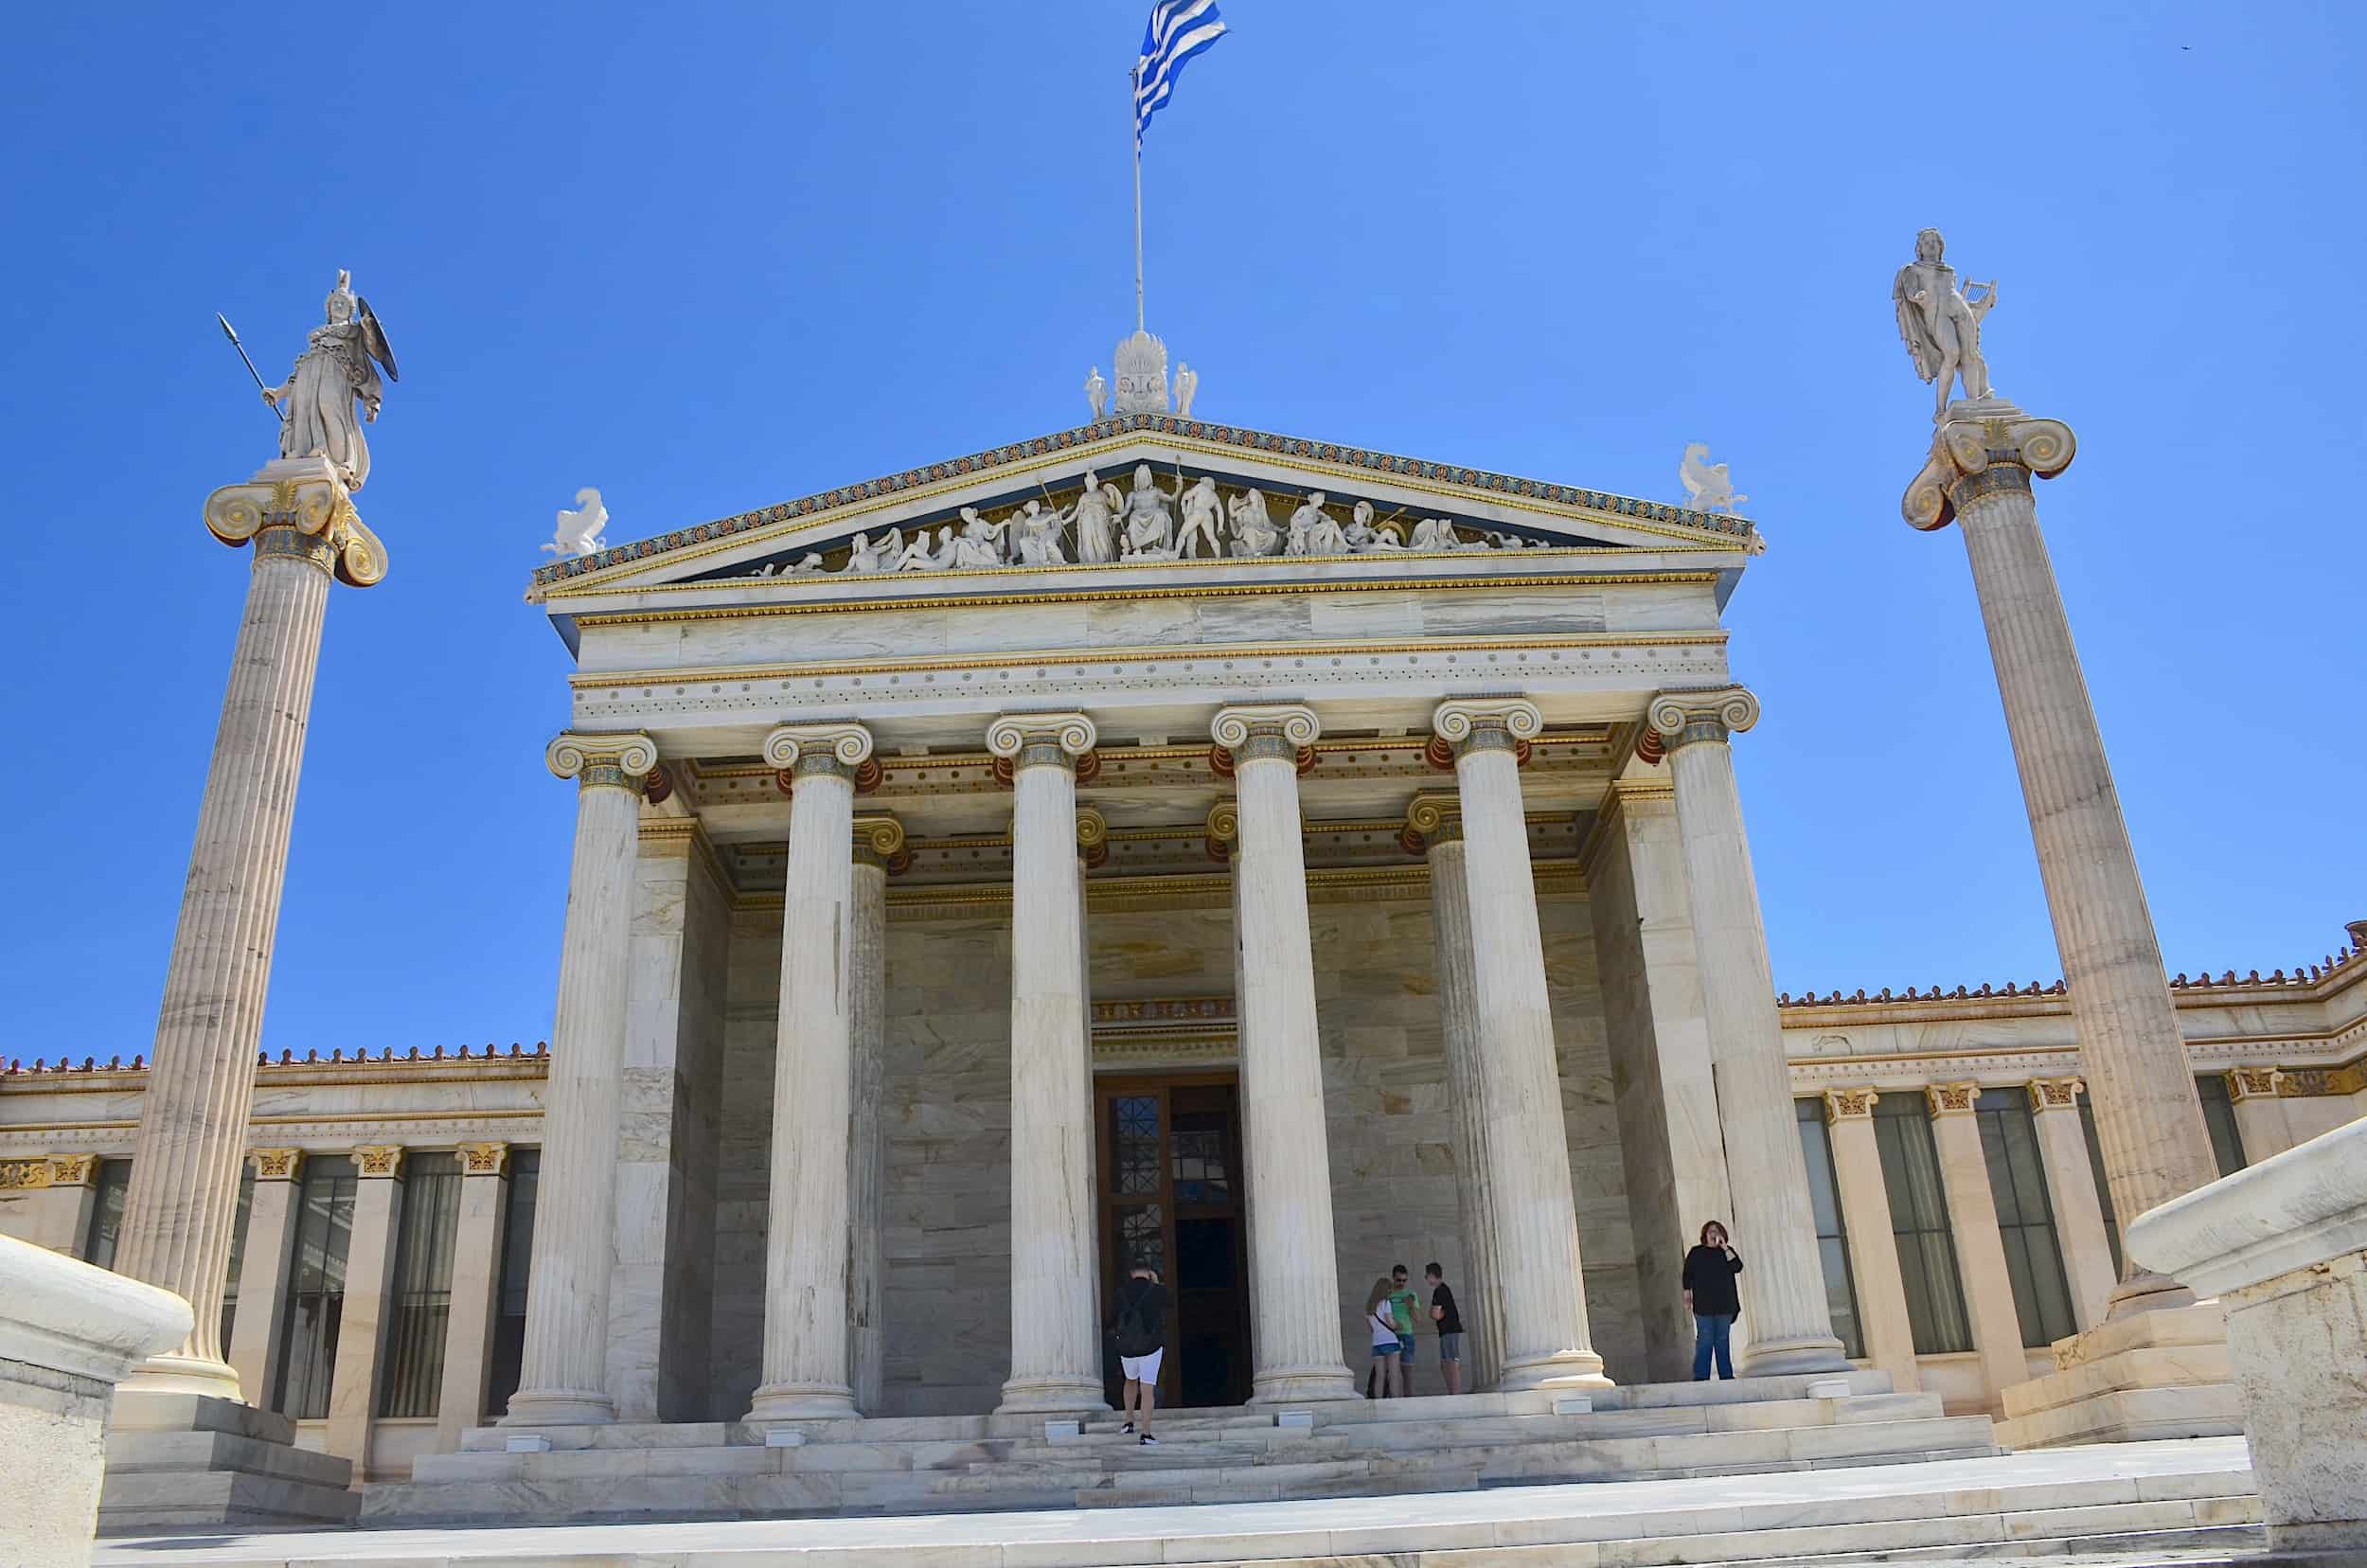 Central building of the Academy of Athens